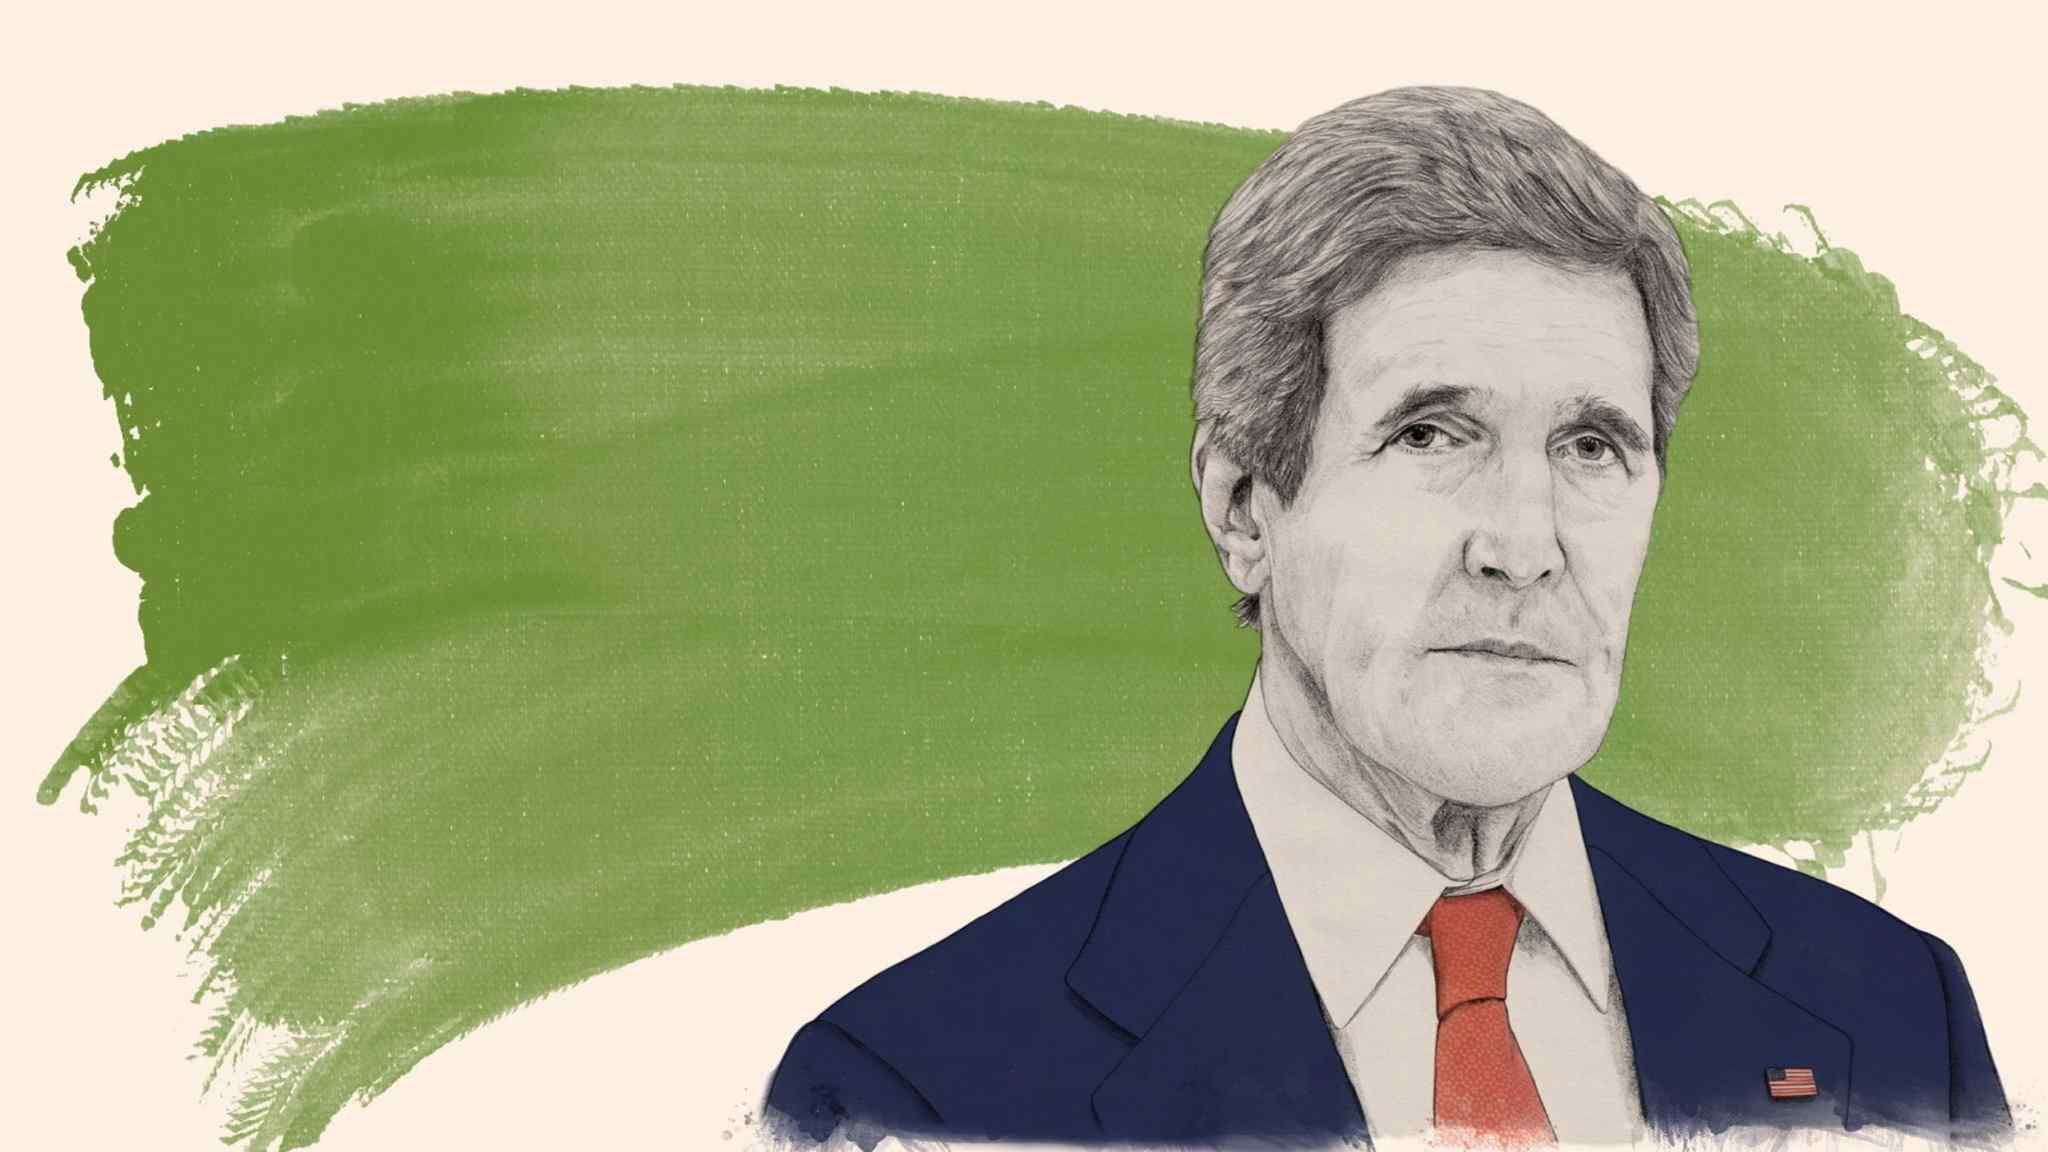 John Kerry: Energy transition is the ‘new industrial revolution’